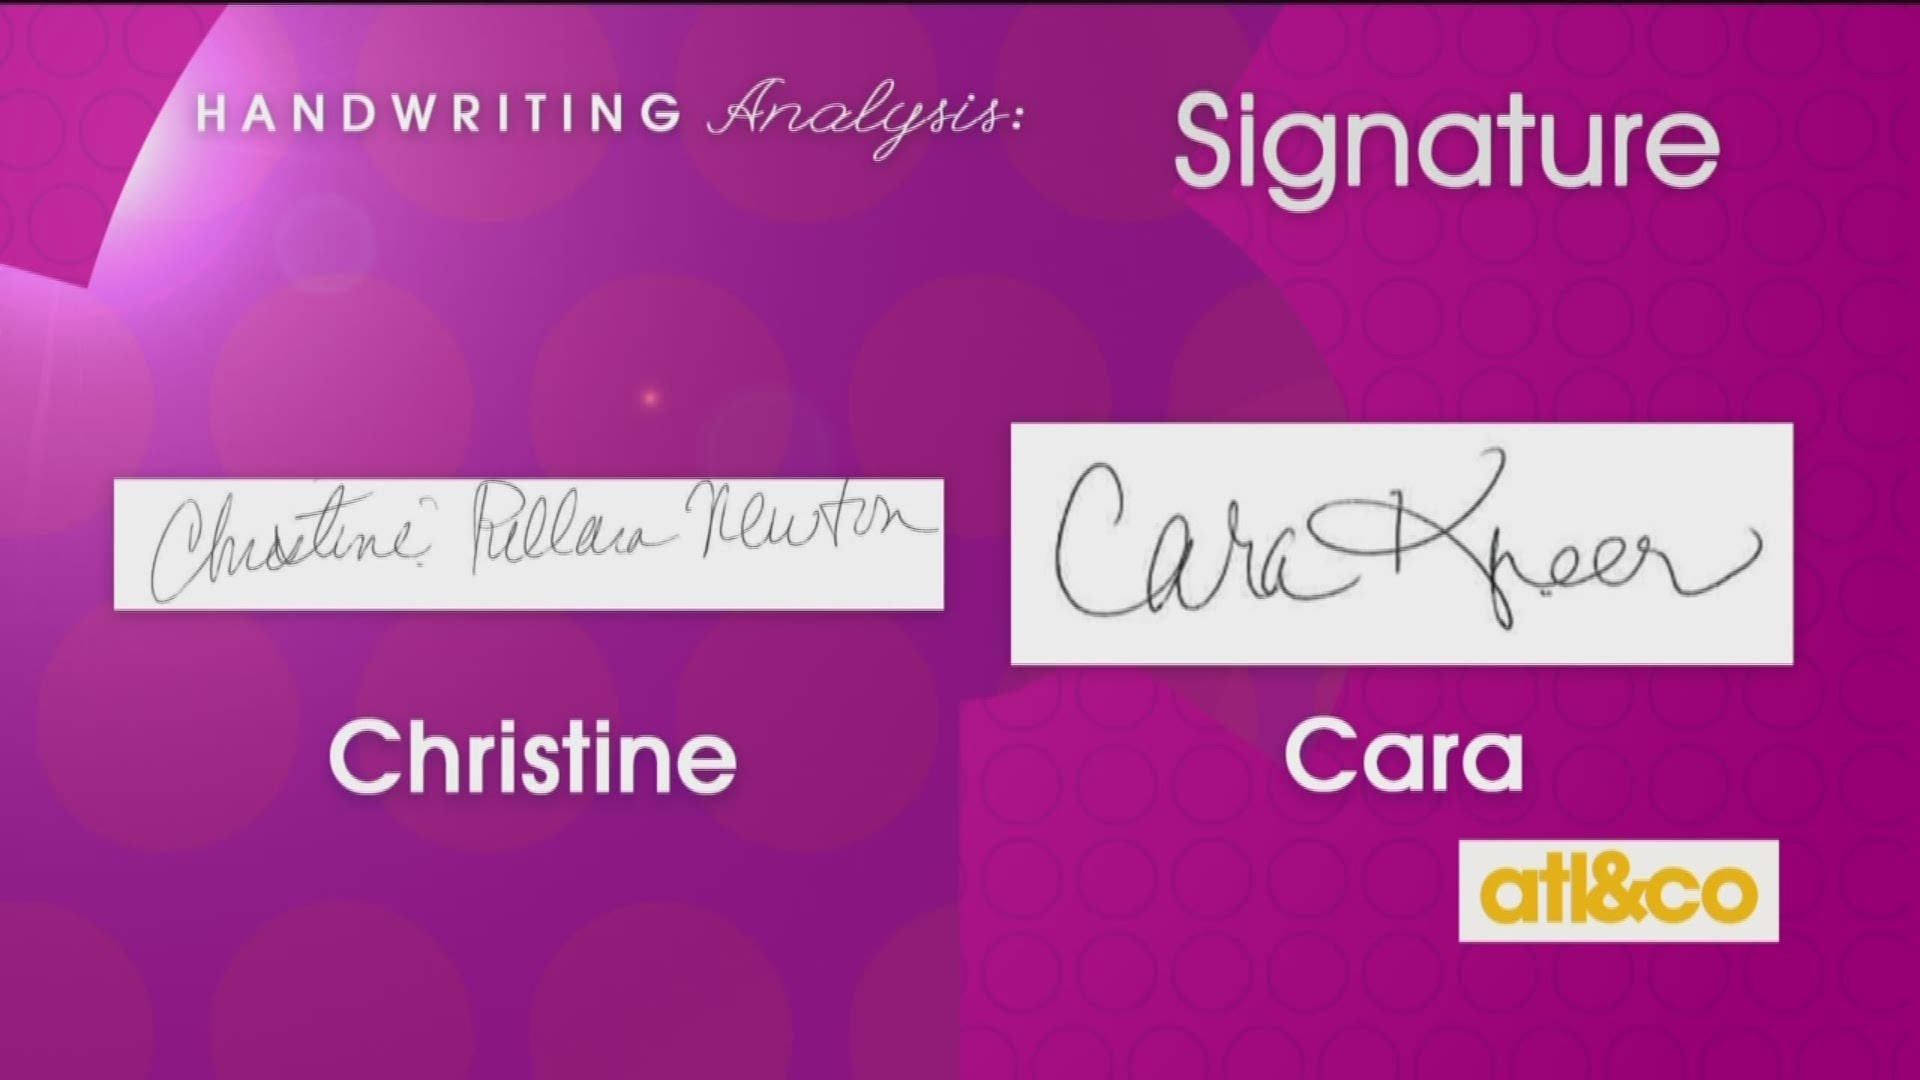 Christine and Cara analyze their handwriting style and get personality traits from their penmanship.